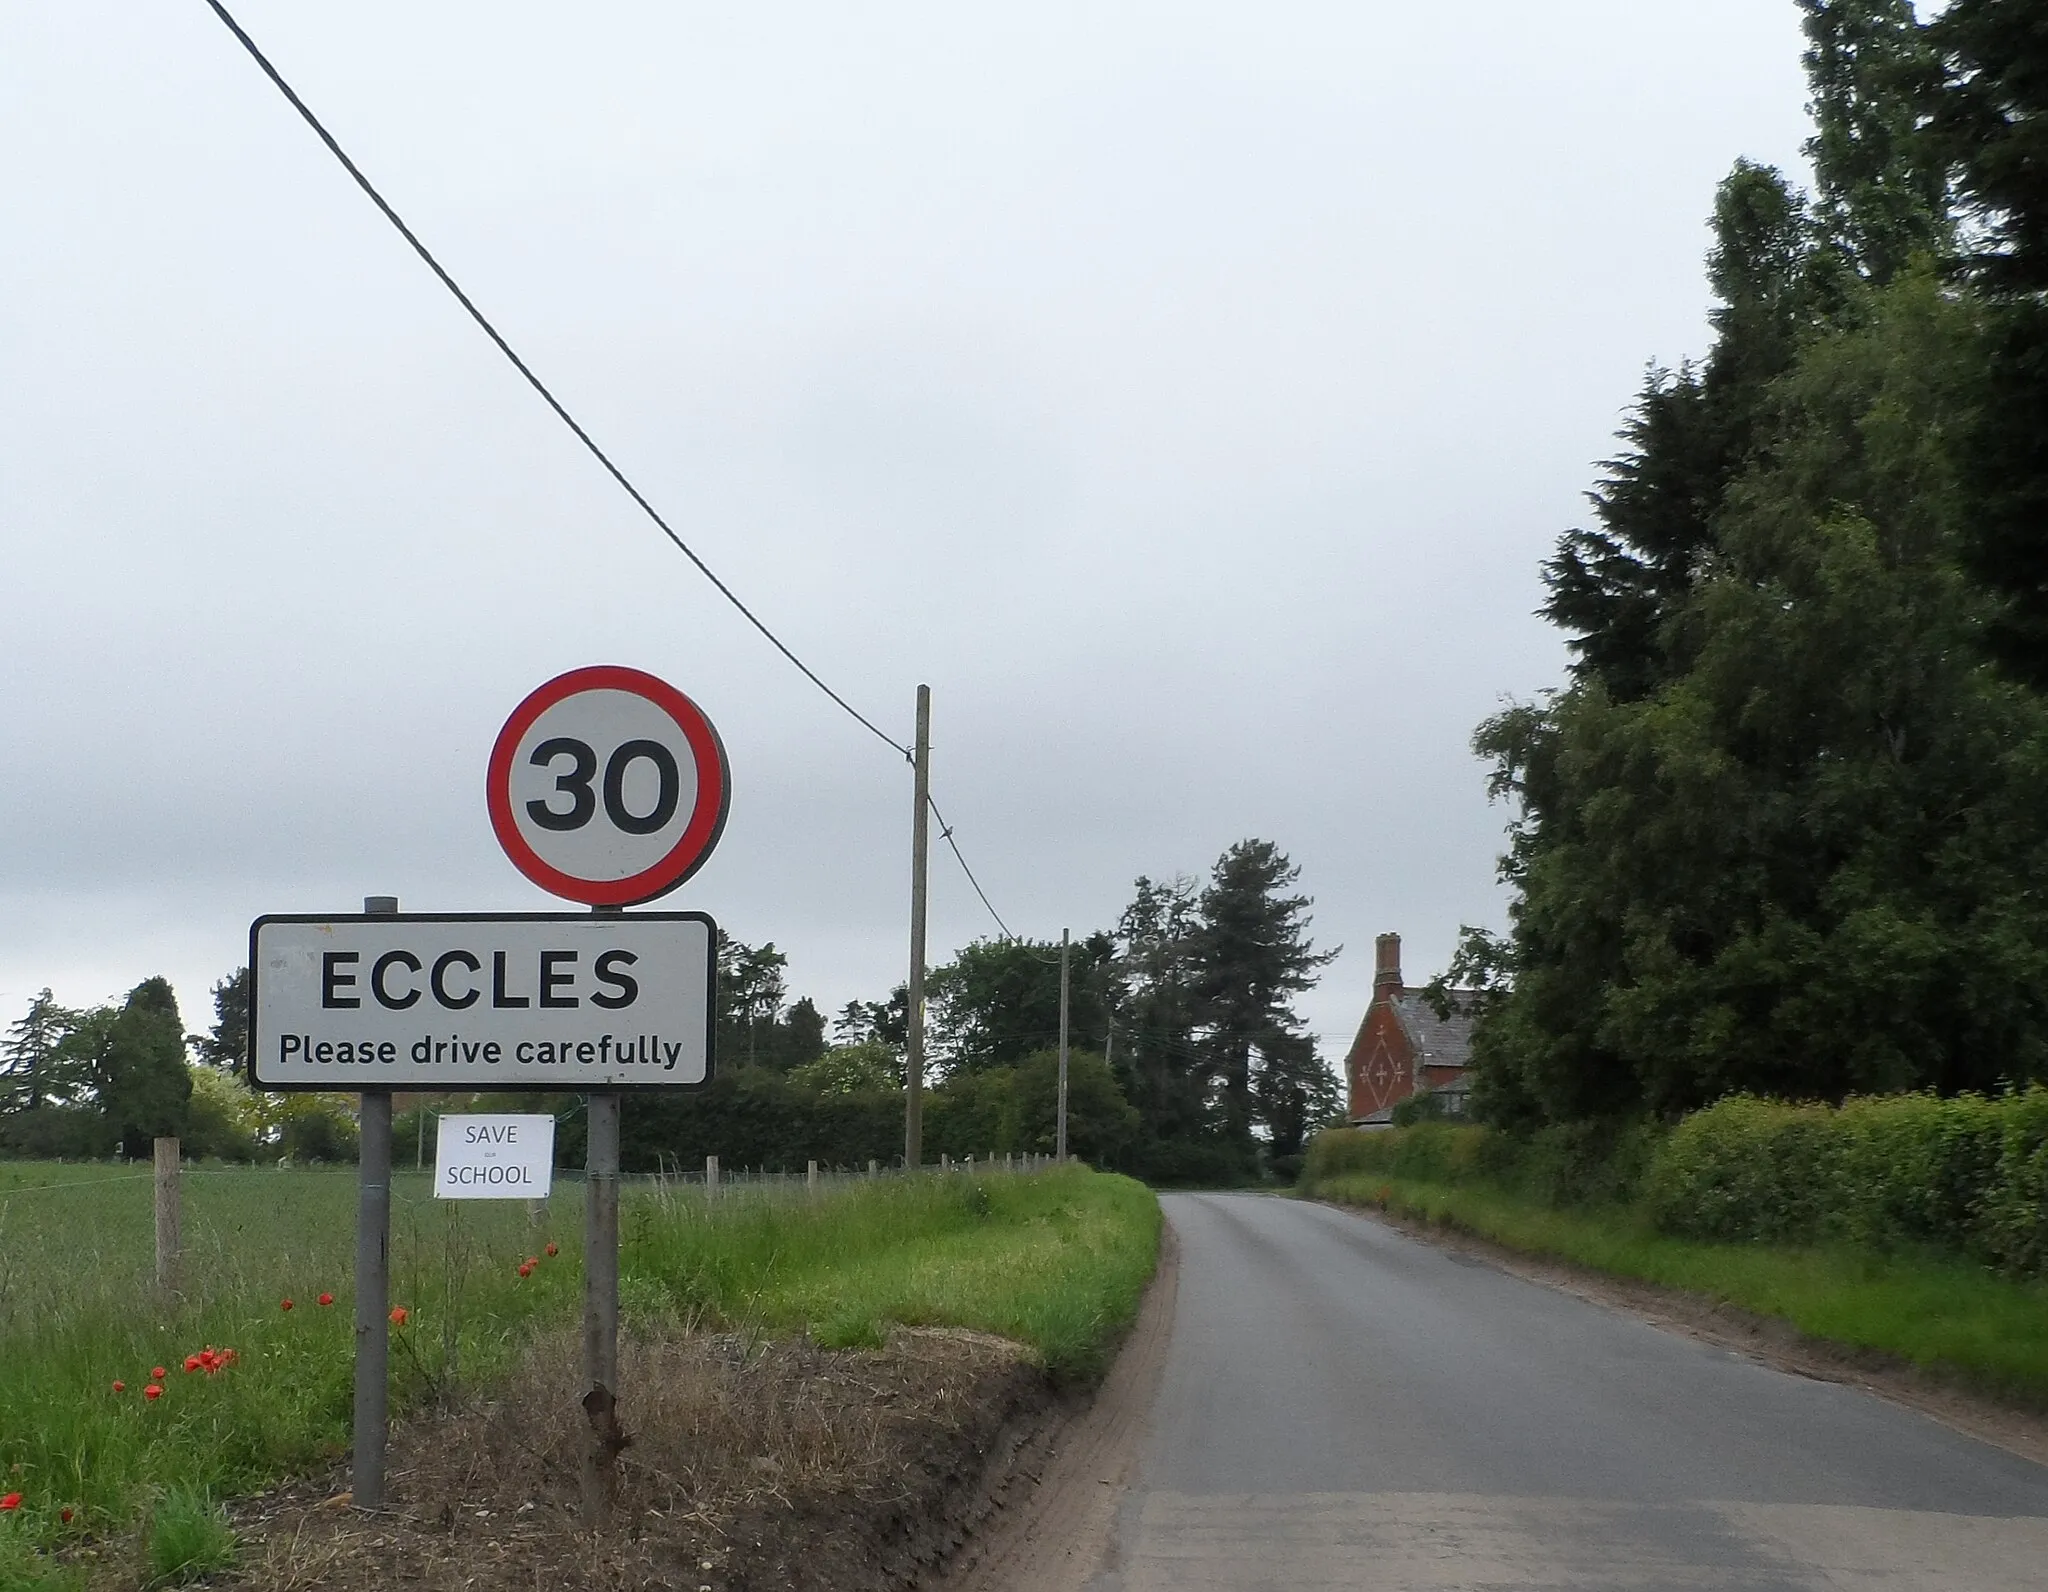 Photo showing: Eccles sign and school